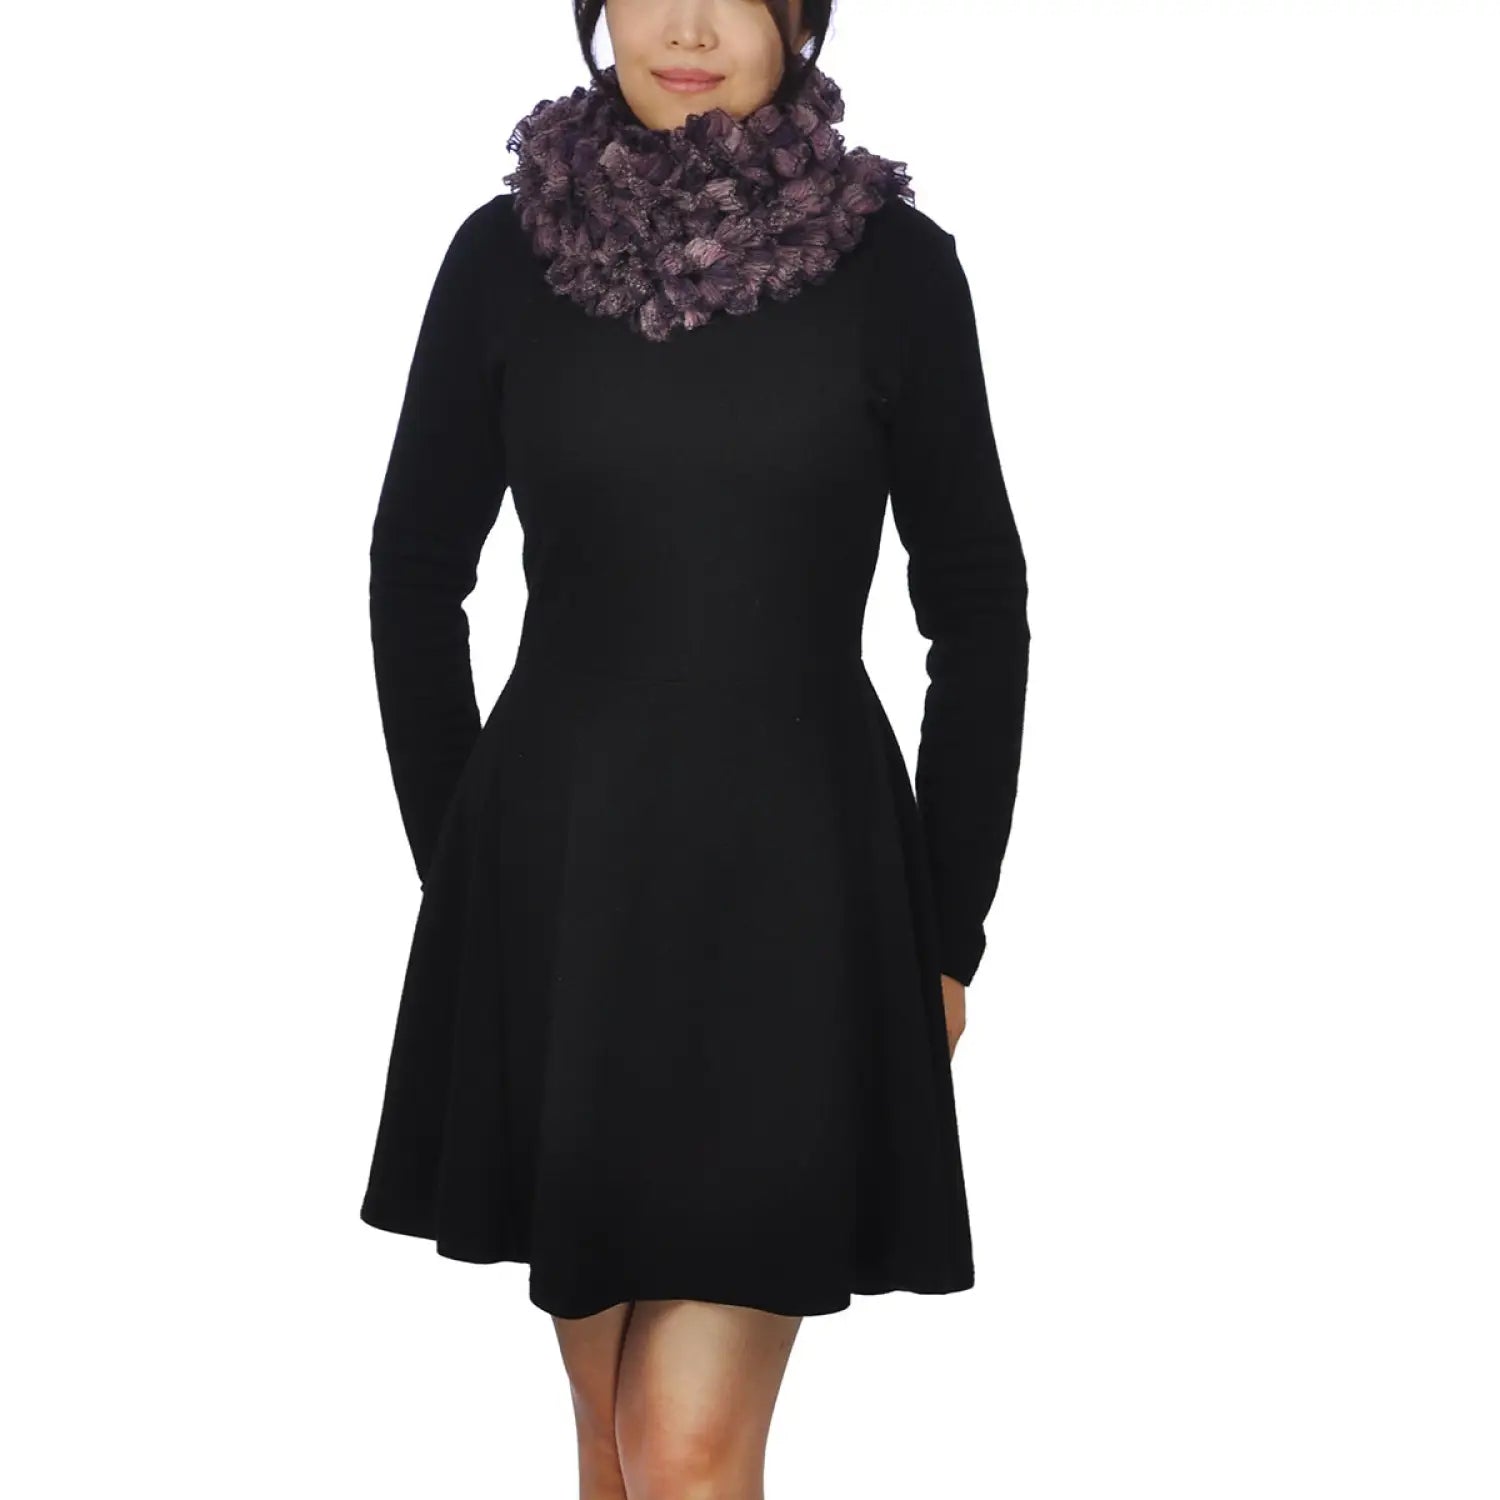 Woman in black dress with purple scarf from Multicoloured Textured Boa Print Scarf product